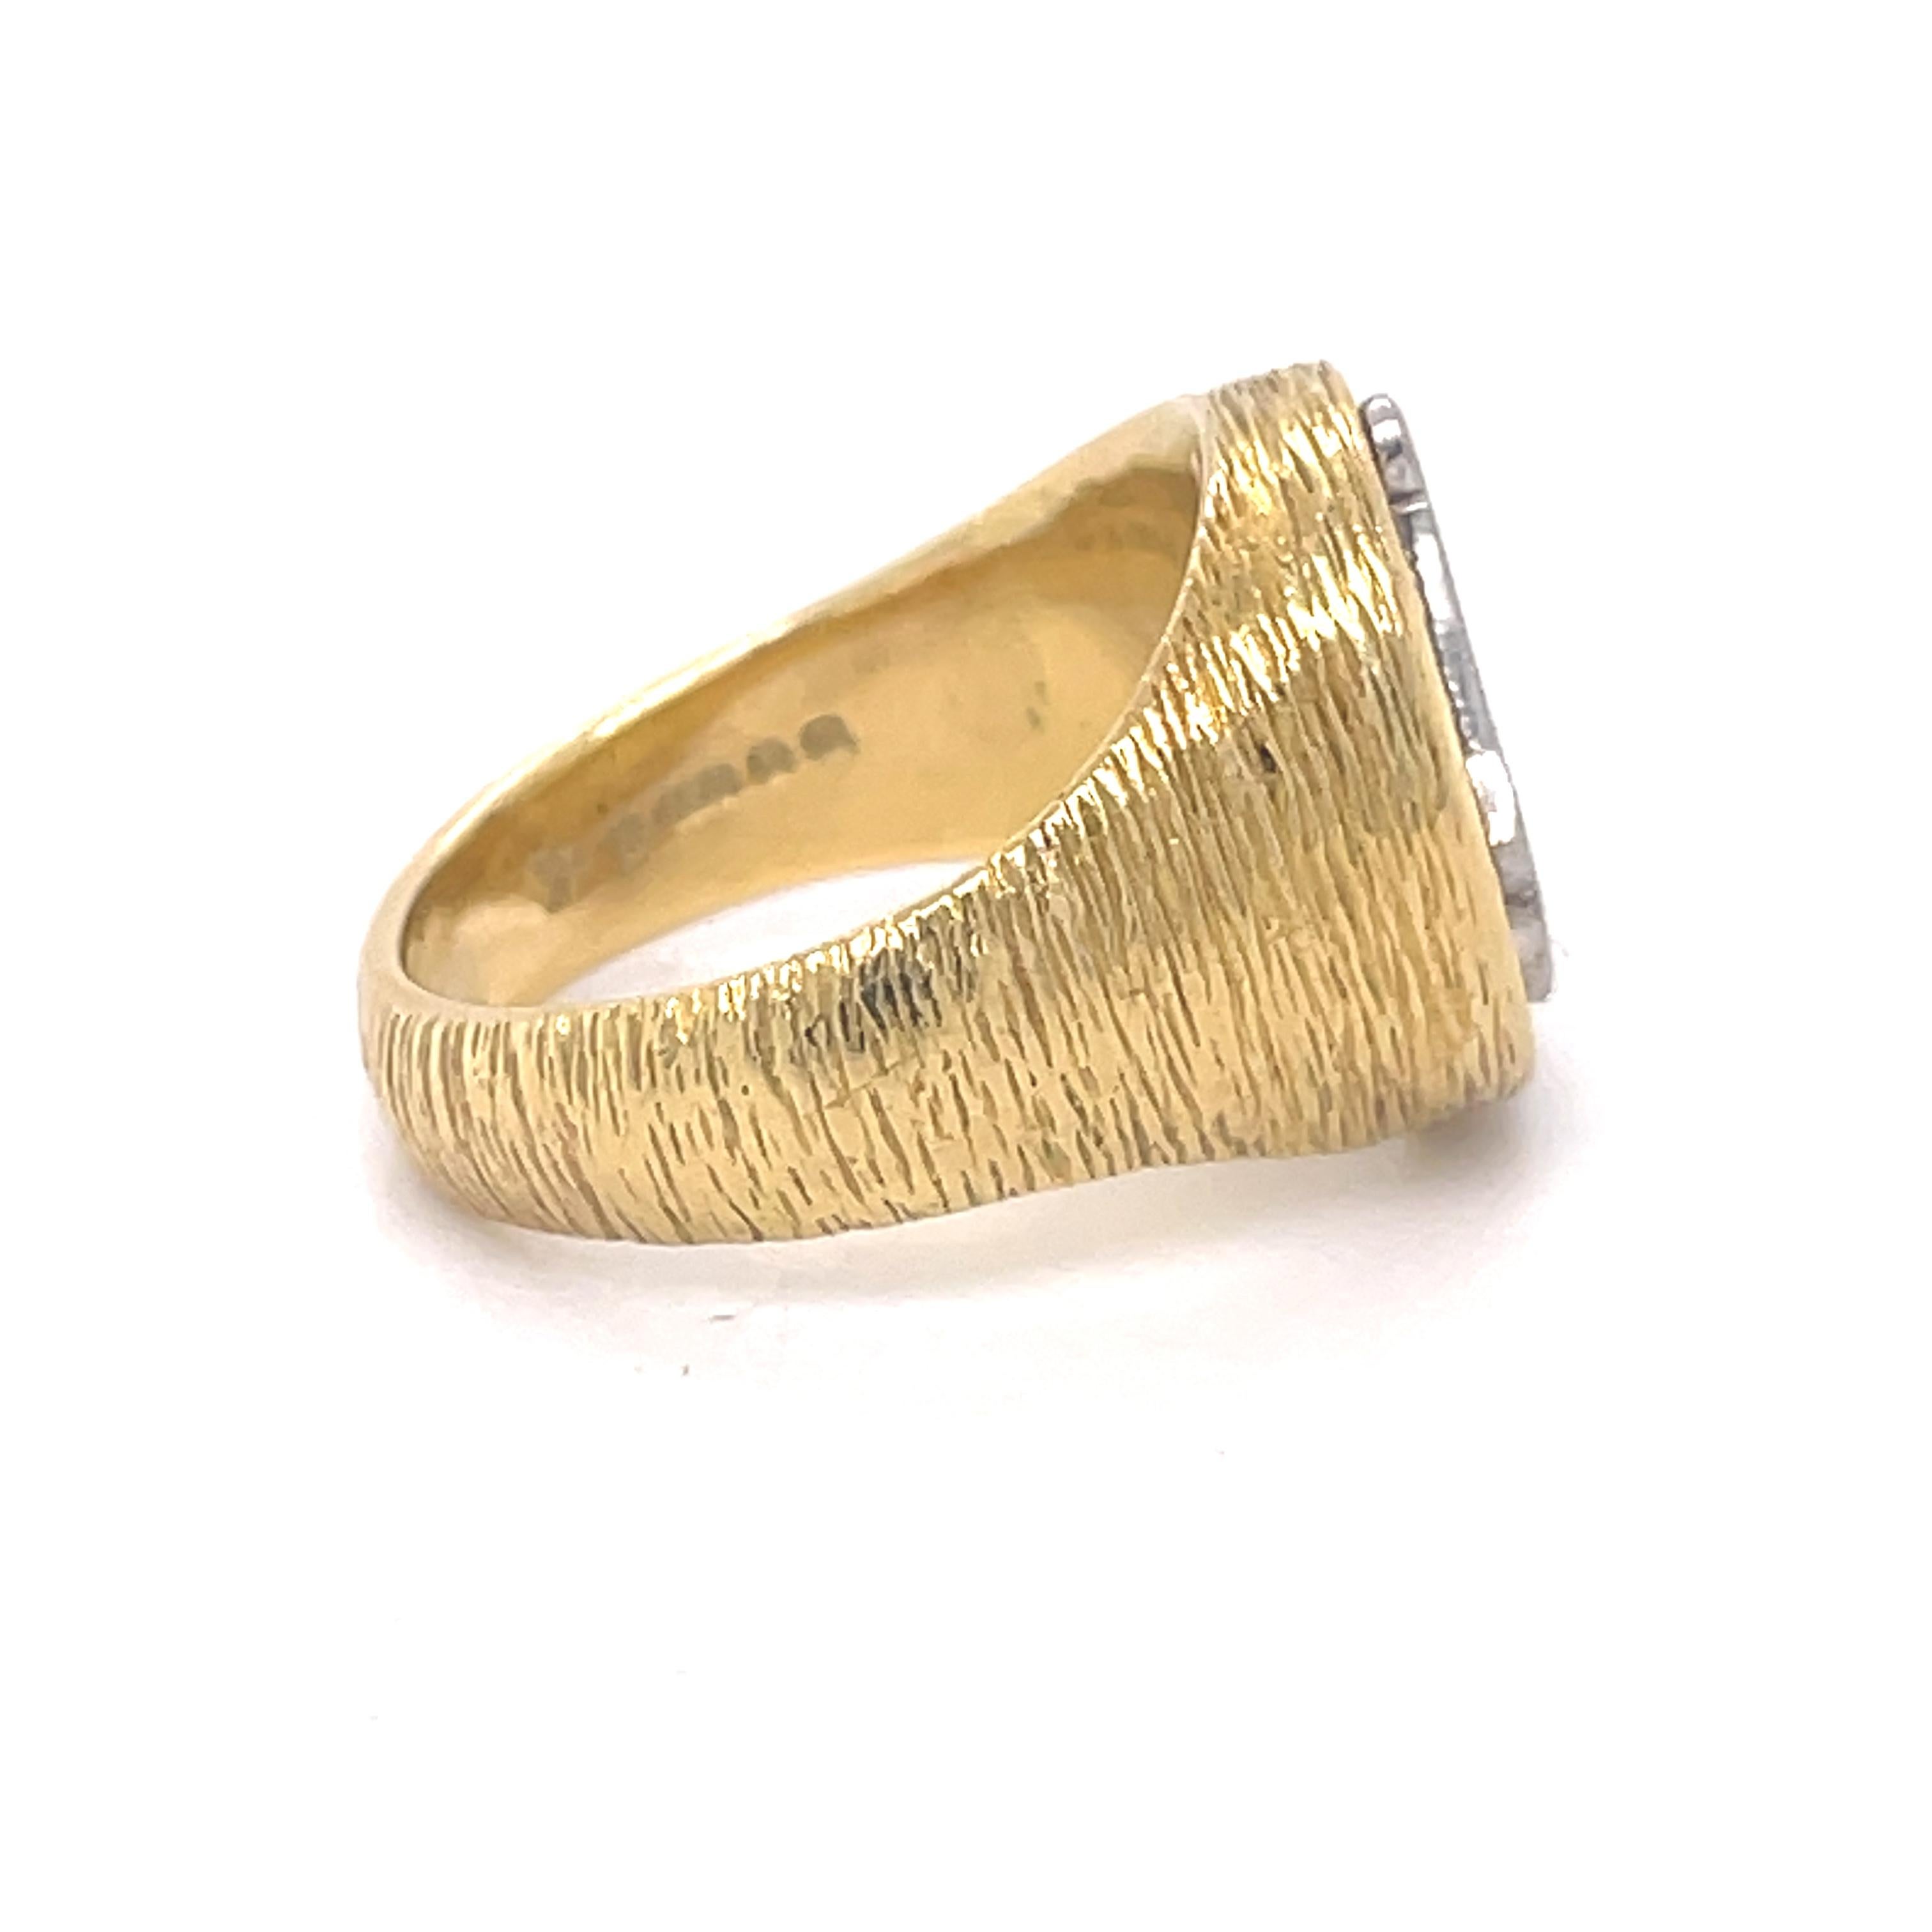 Free Masons Pinky ring - Kutchinsky jewelry, 18K yellow gold, freemasons symbol In Excellent Condition For Sale In Ramat Gan, IL